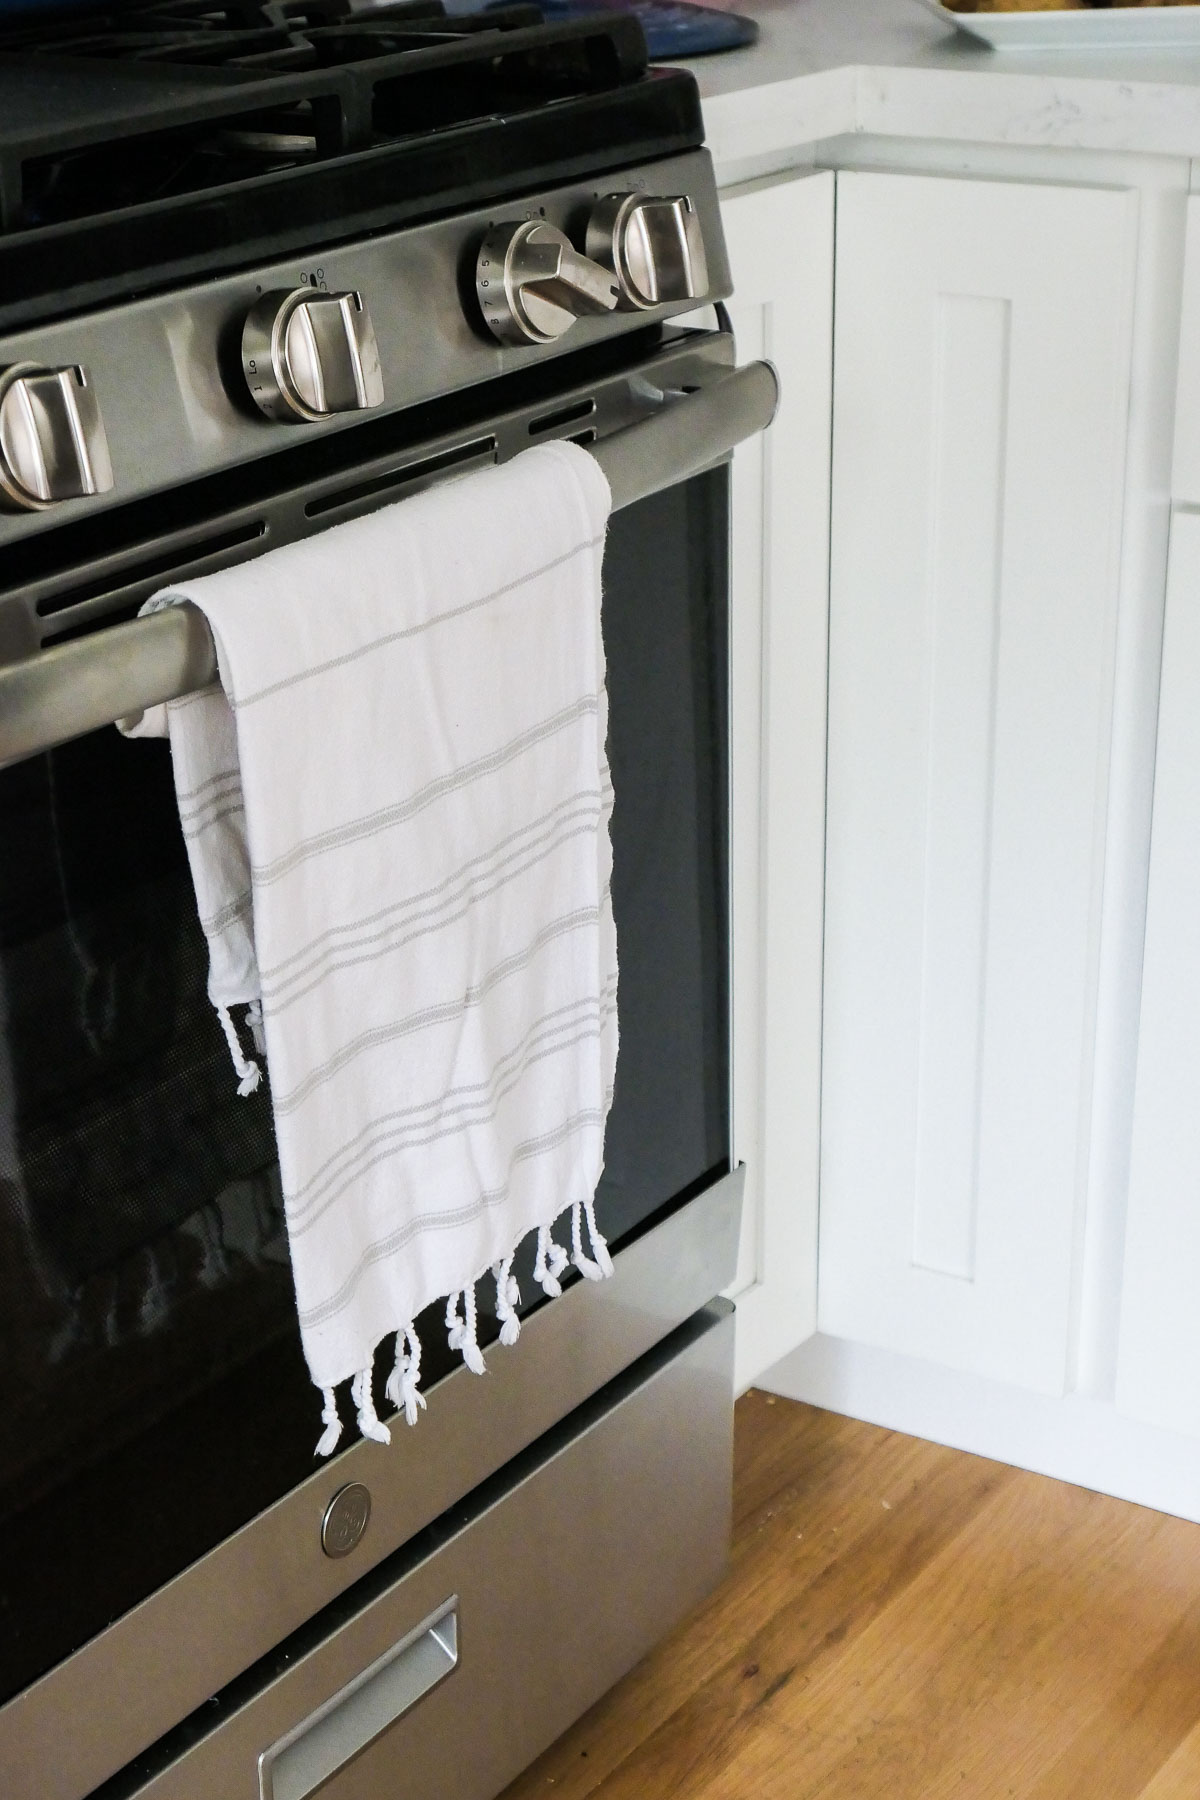 Dish Towel on Oven - How to Stop Using Paper Towels